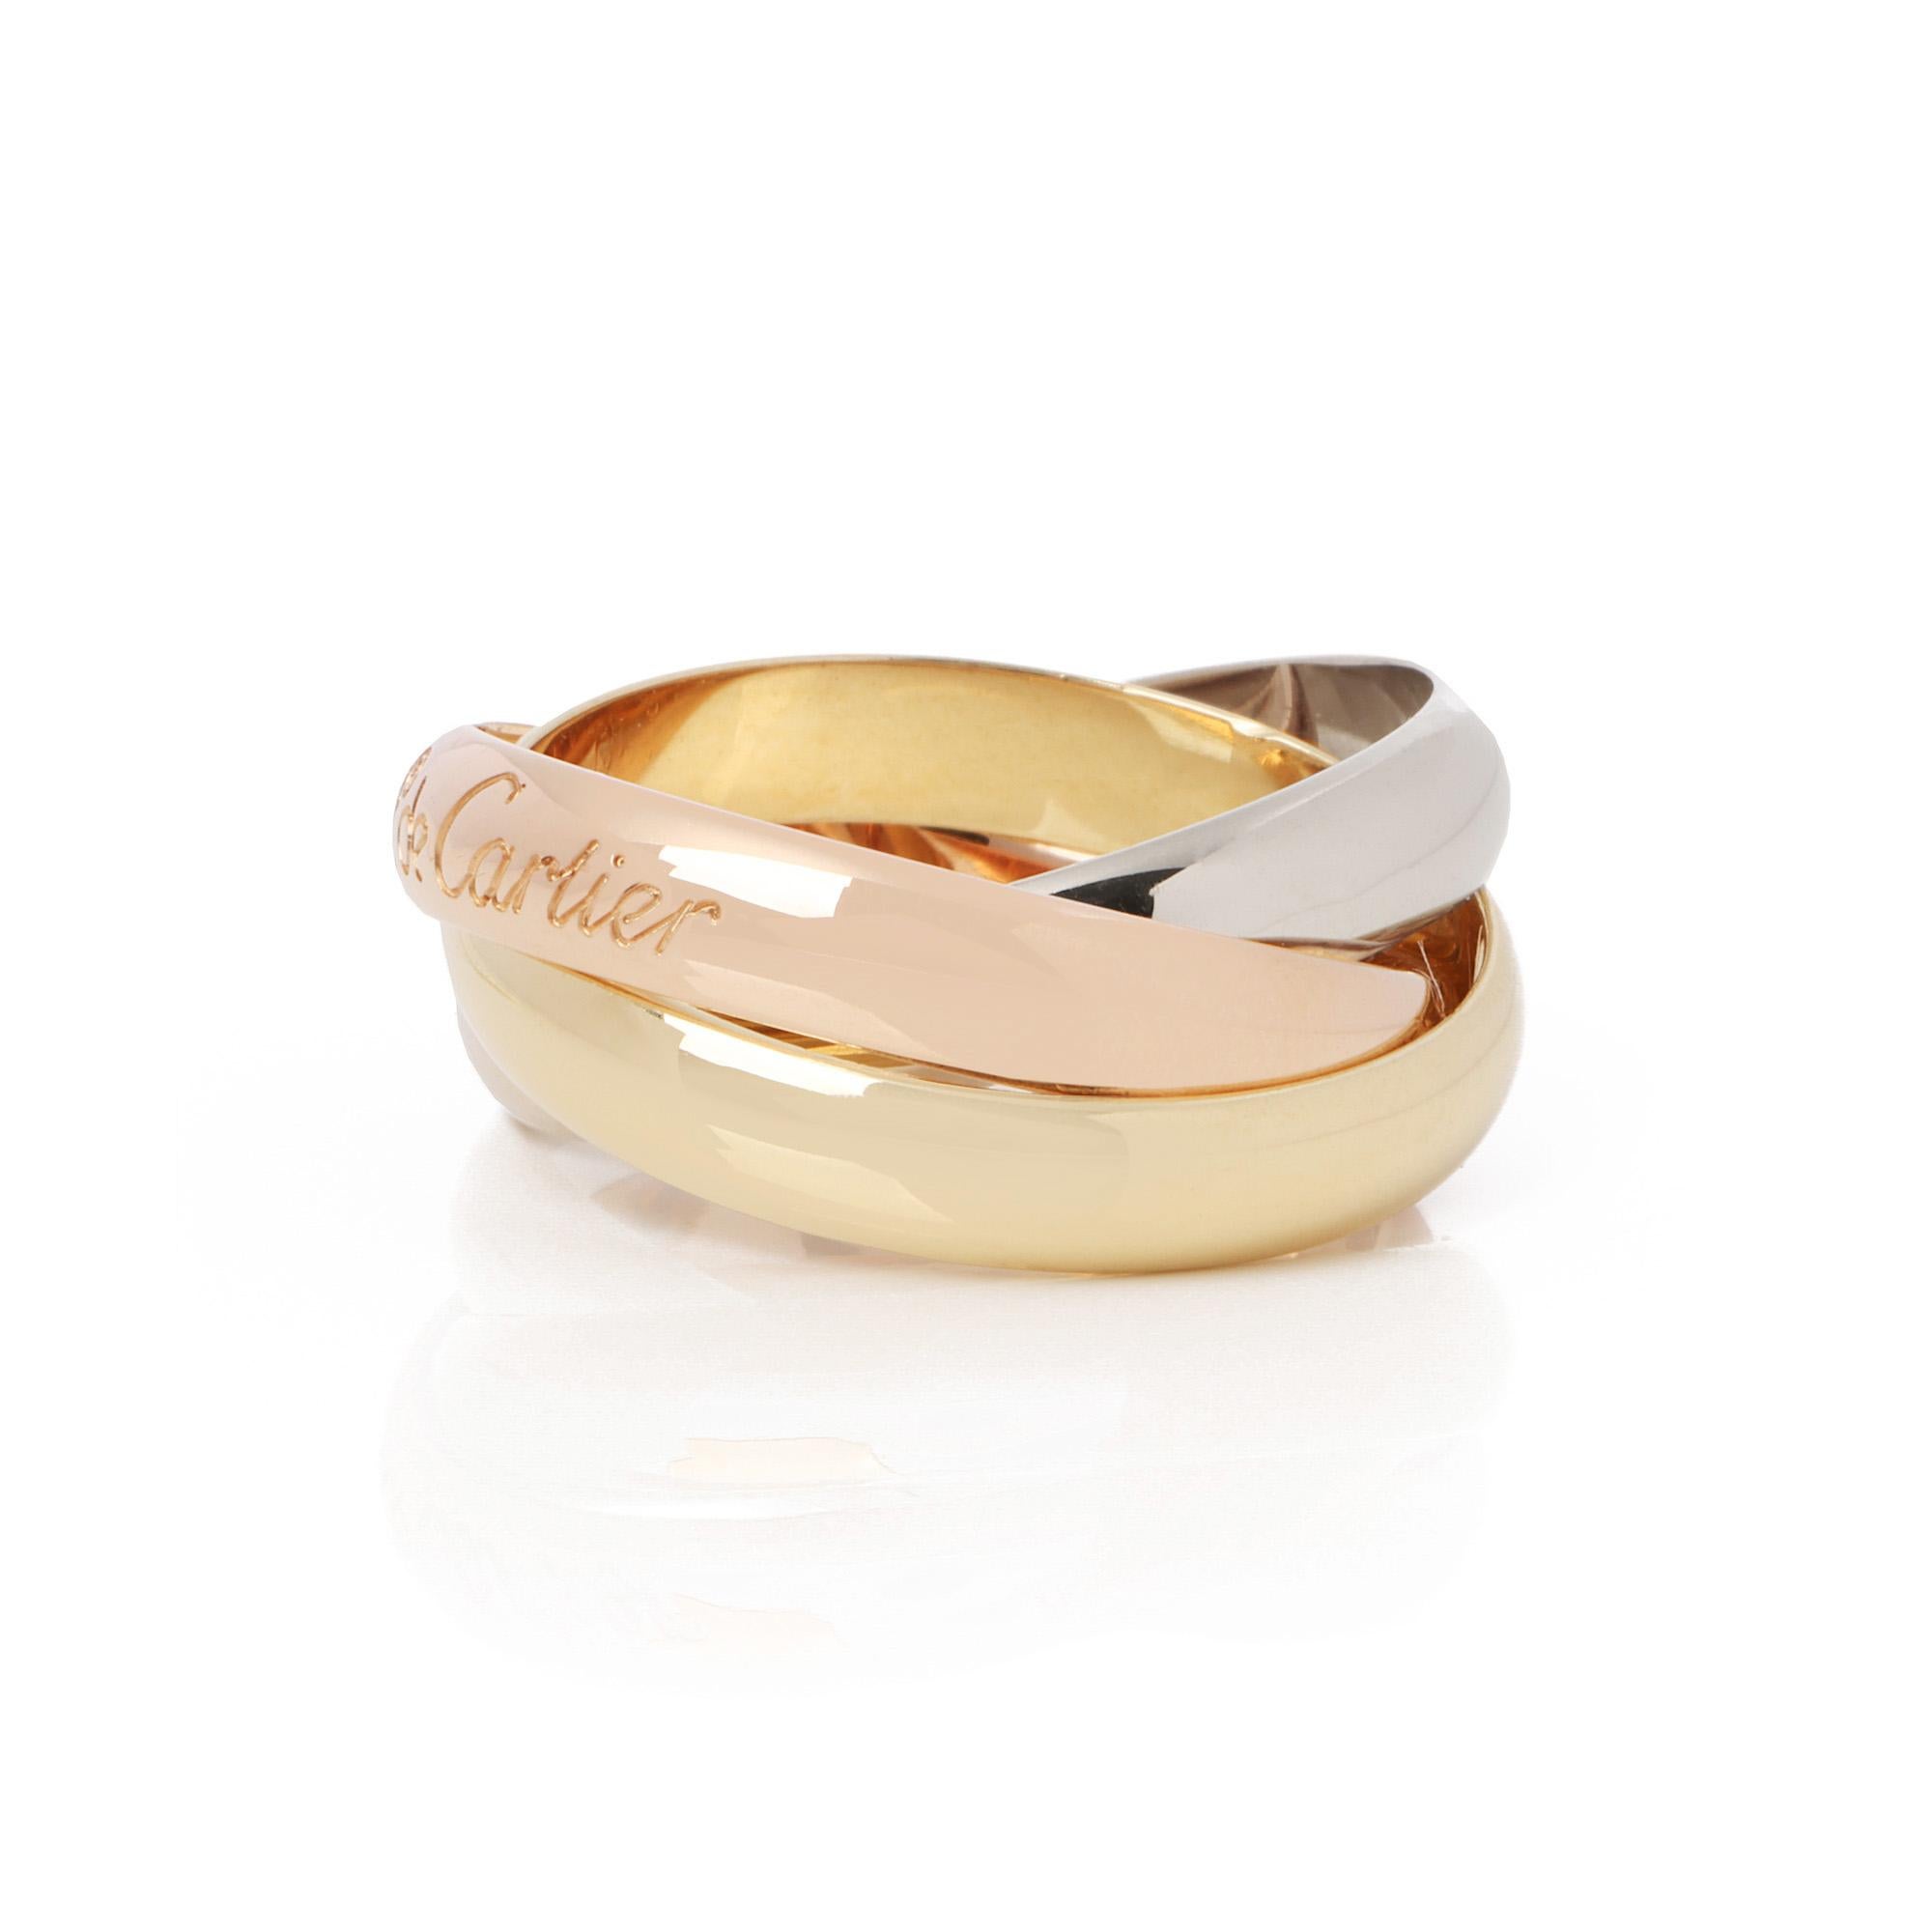 This ring by Cartier is from their Trinity collection and features 18k yellow, white and rose gold interlinking bands. UK ring size K 1/2. EU ring size 51. US ring size 6. This ring cannot be resized. Complete with a Xupes presentation box. Our